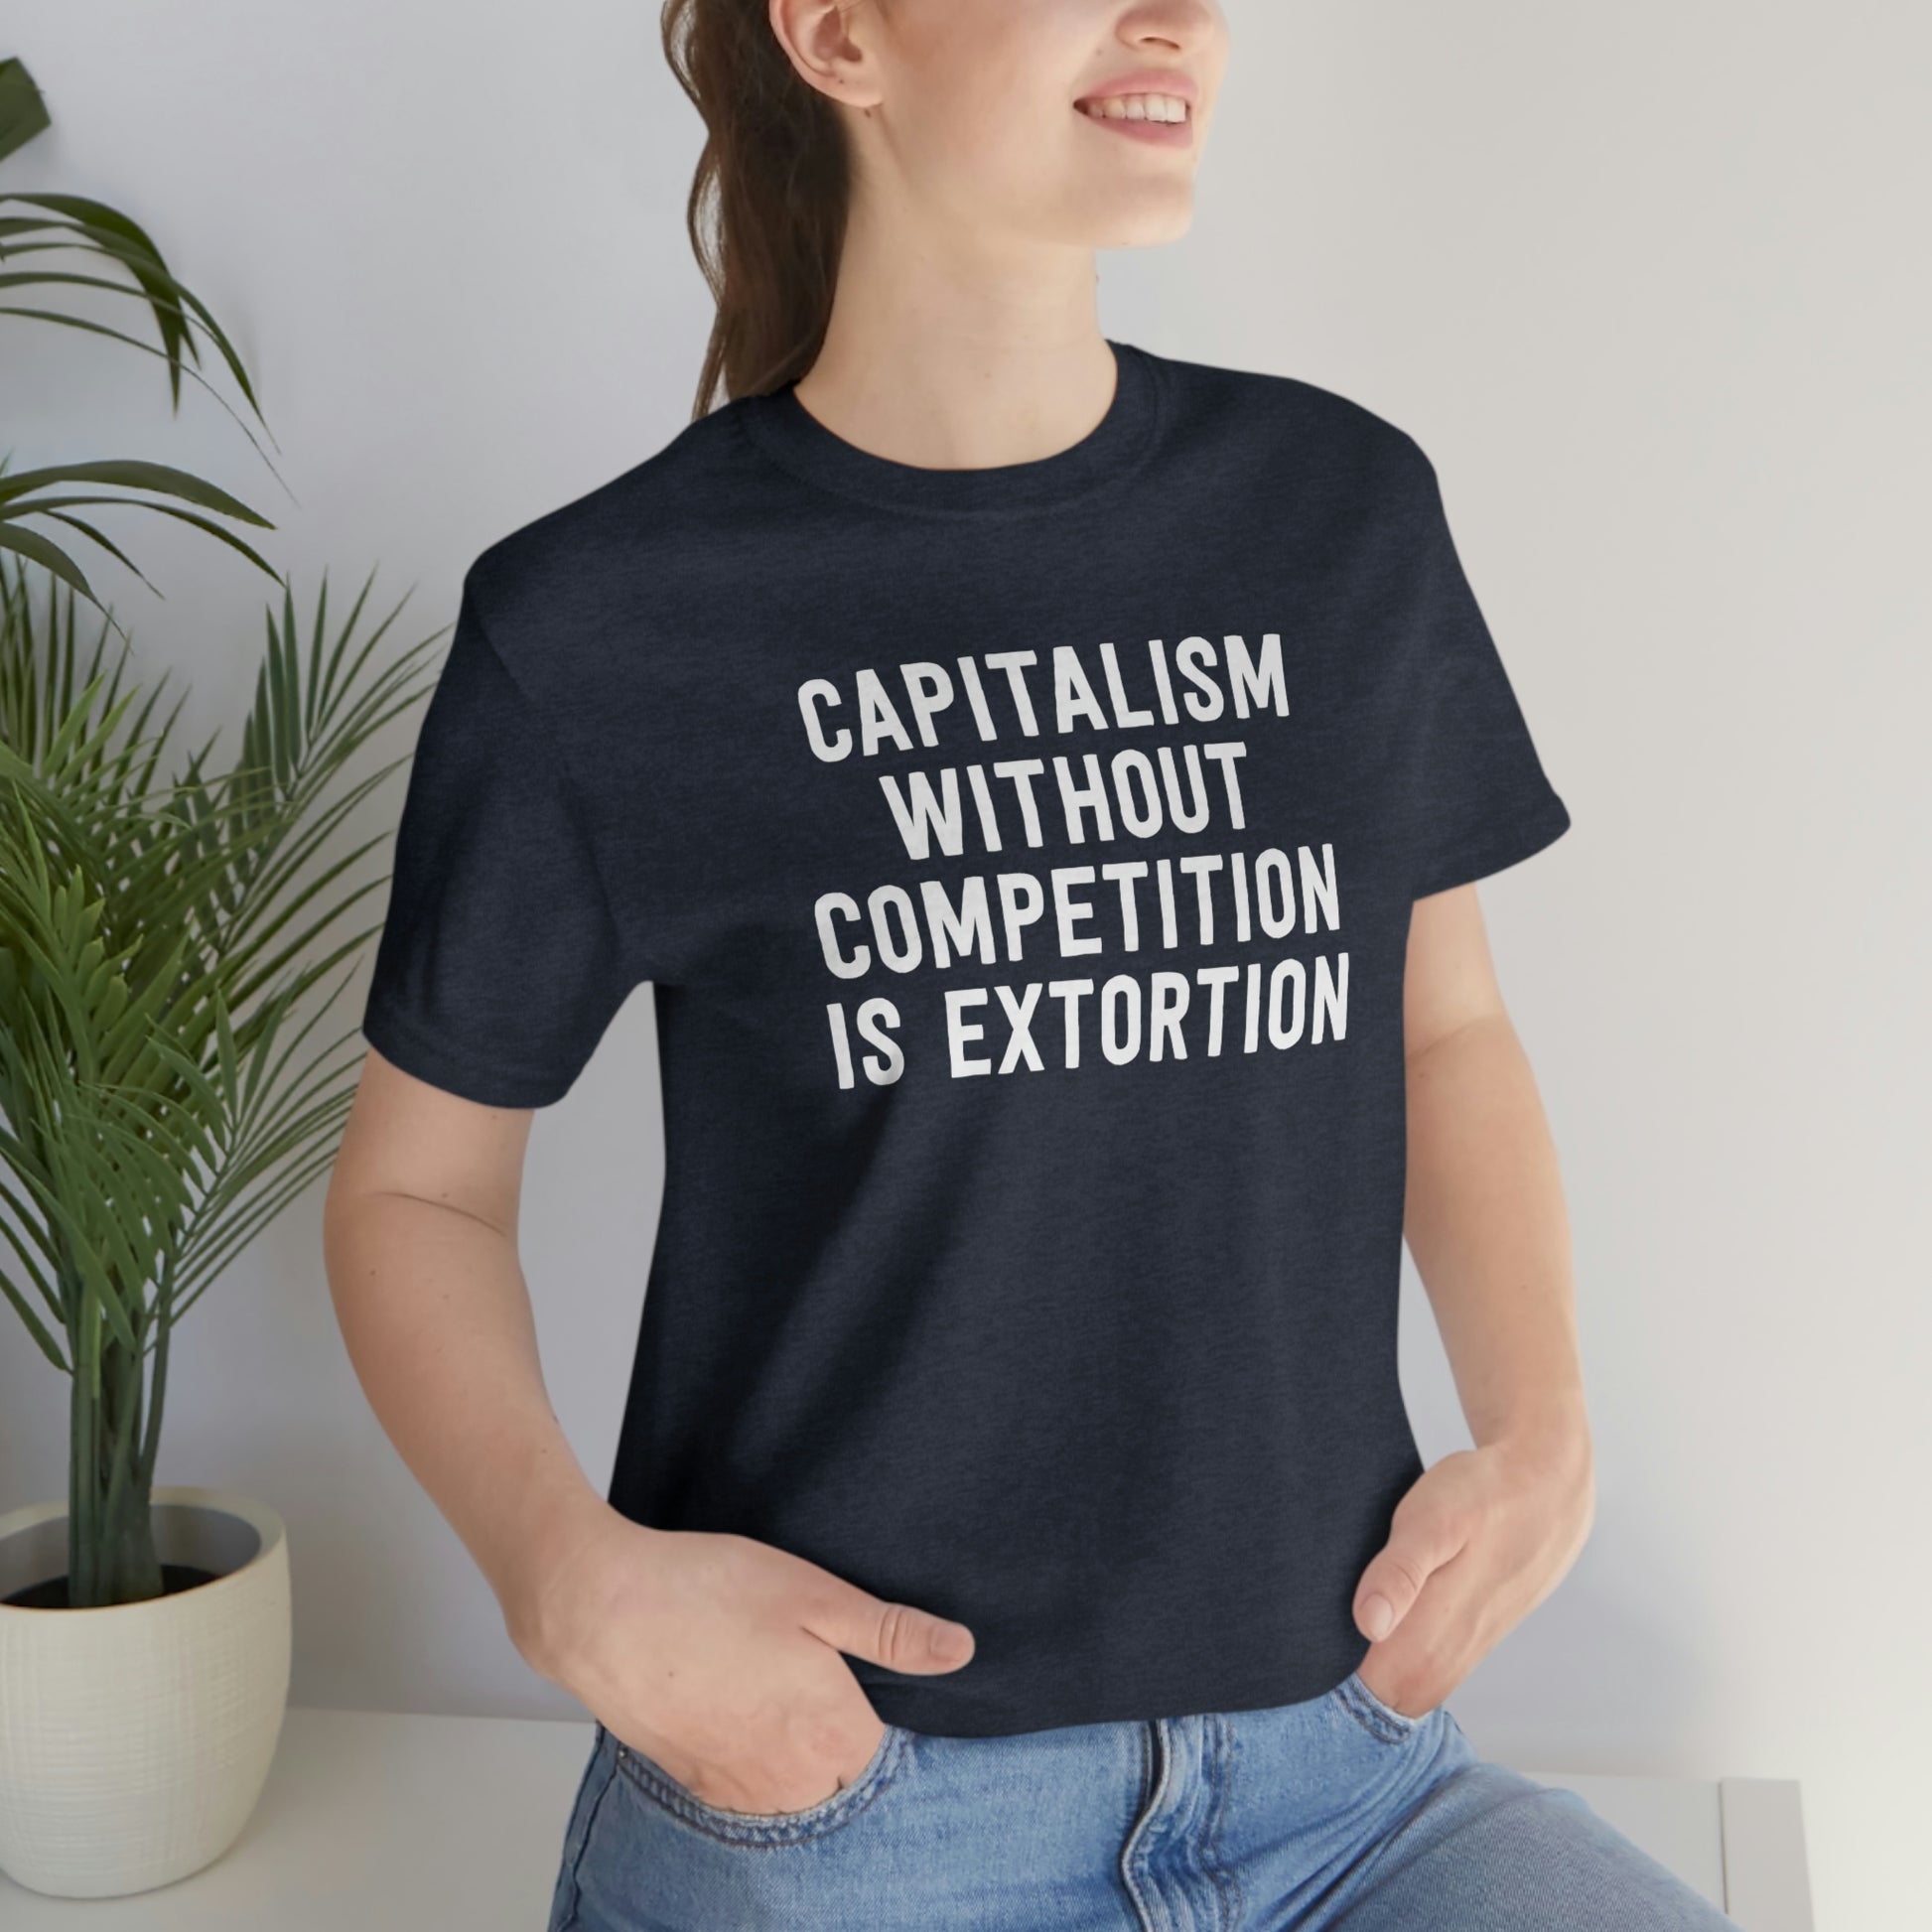 Capitalism Without Competition Is Extortion T-Shirt in Heather Navy - Female Model